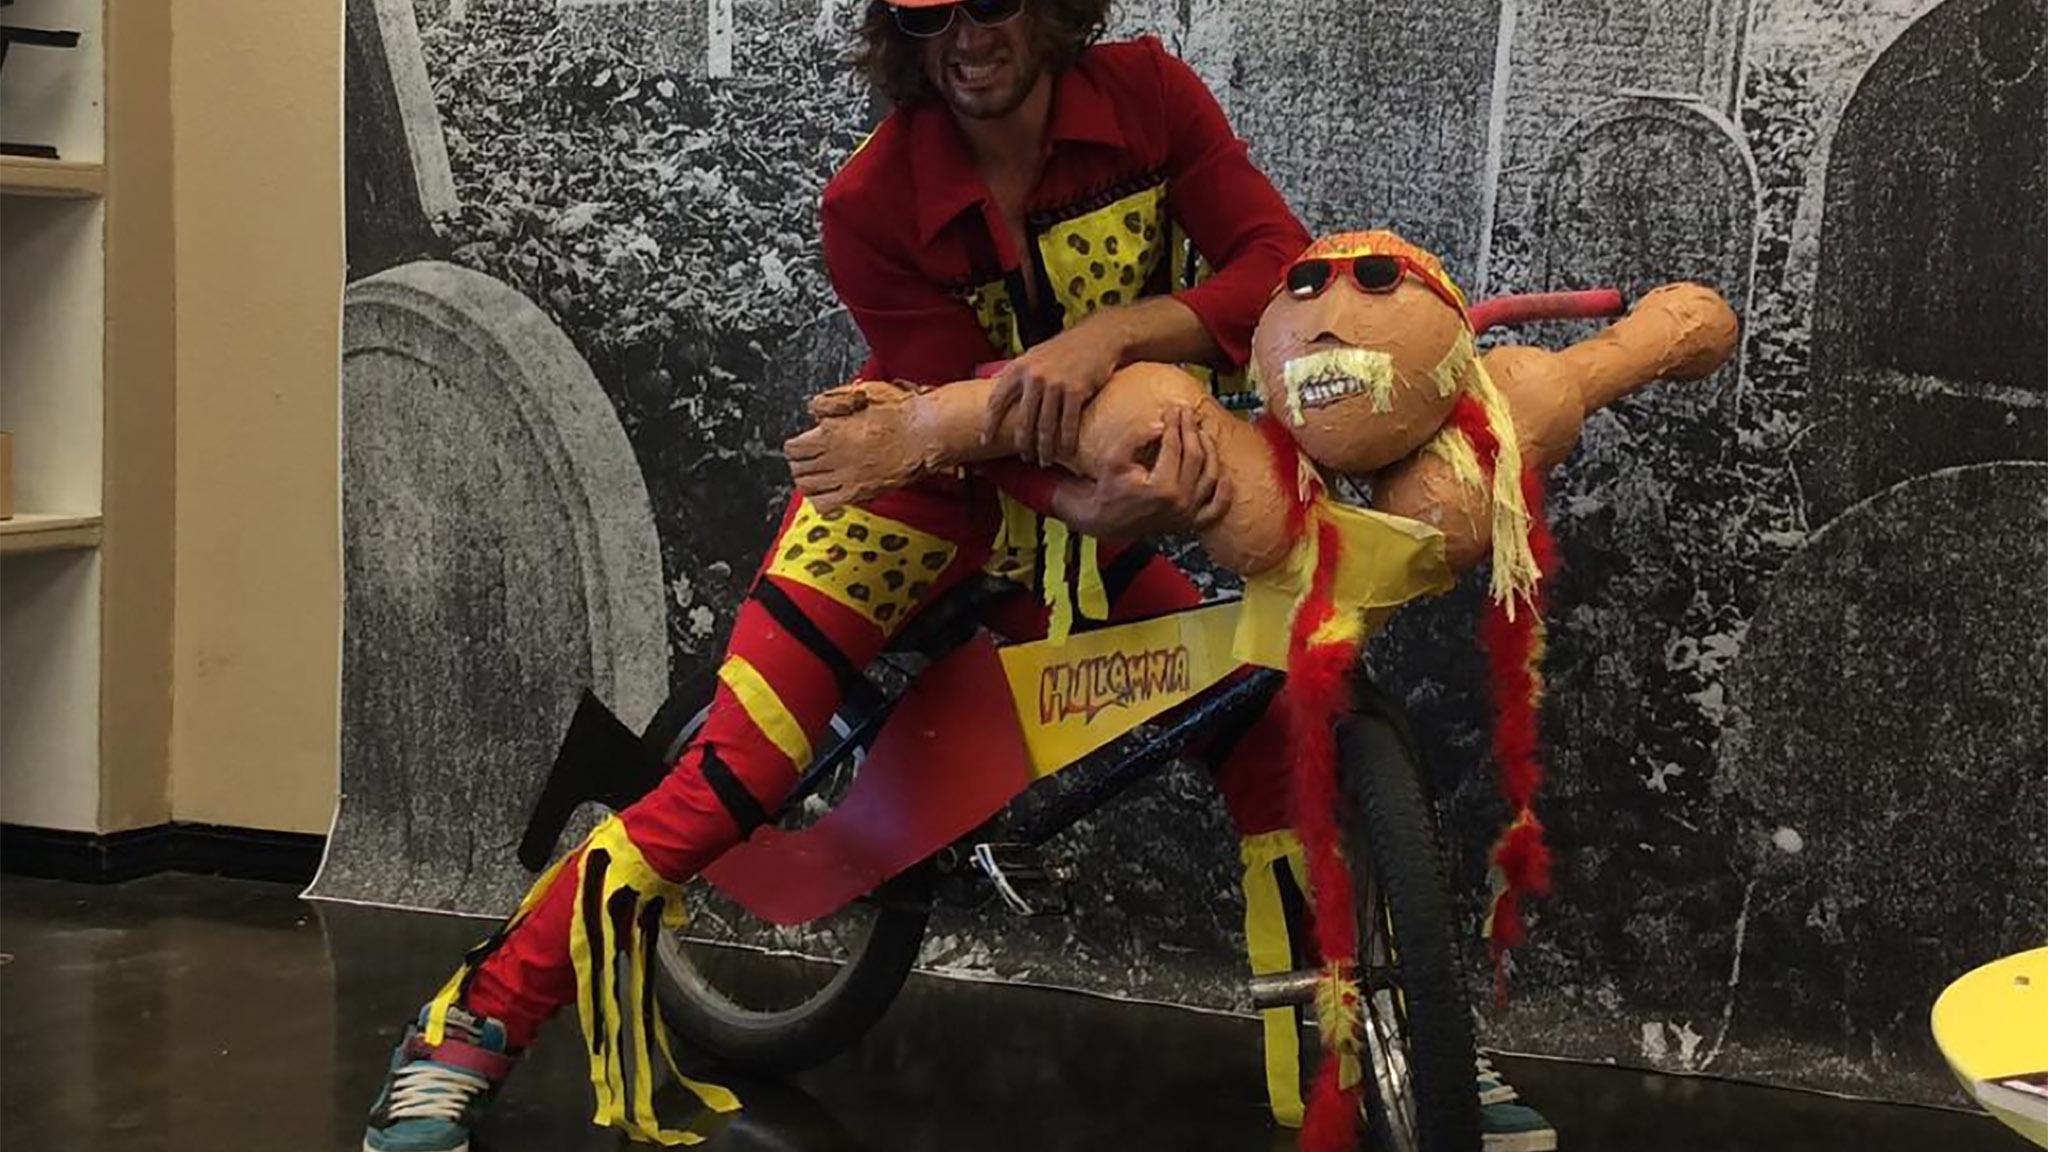 X Games power couple Travis and Lyn-z Pastrana exposed 